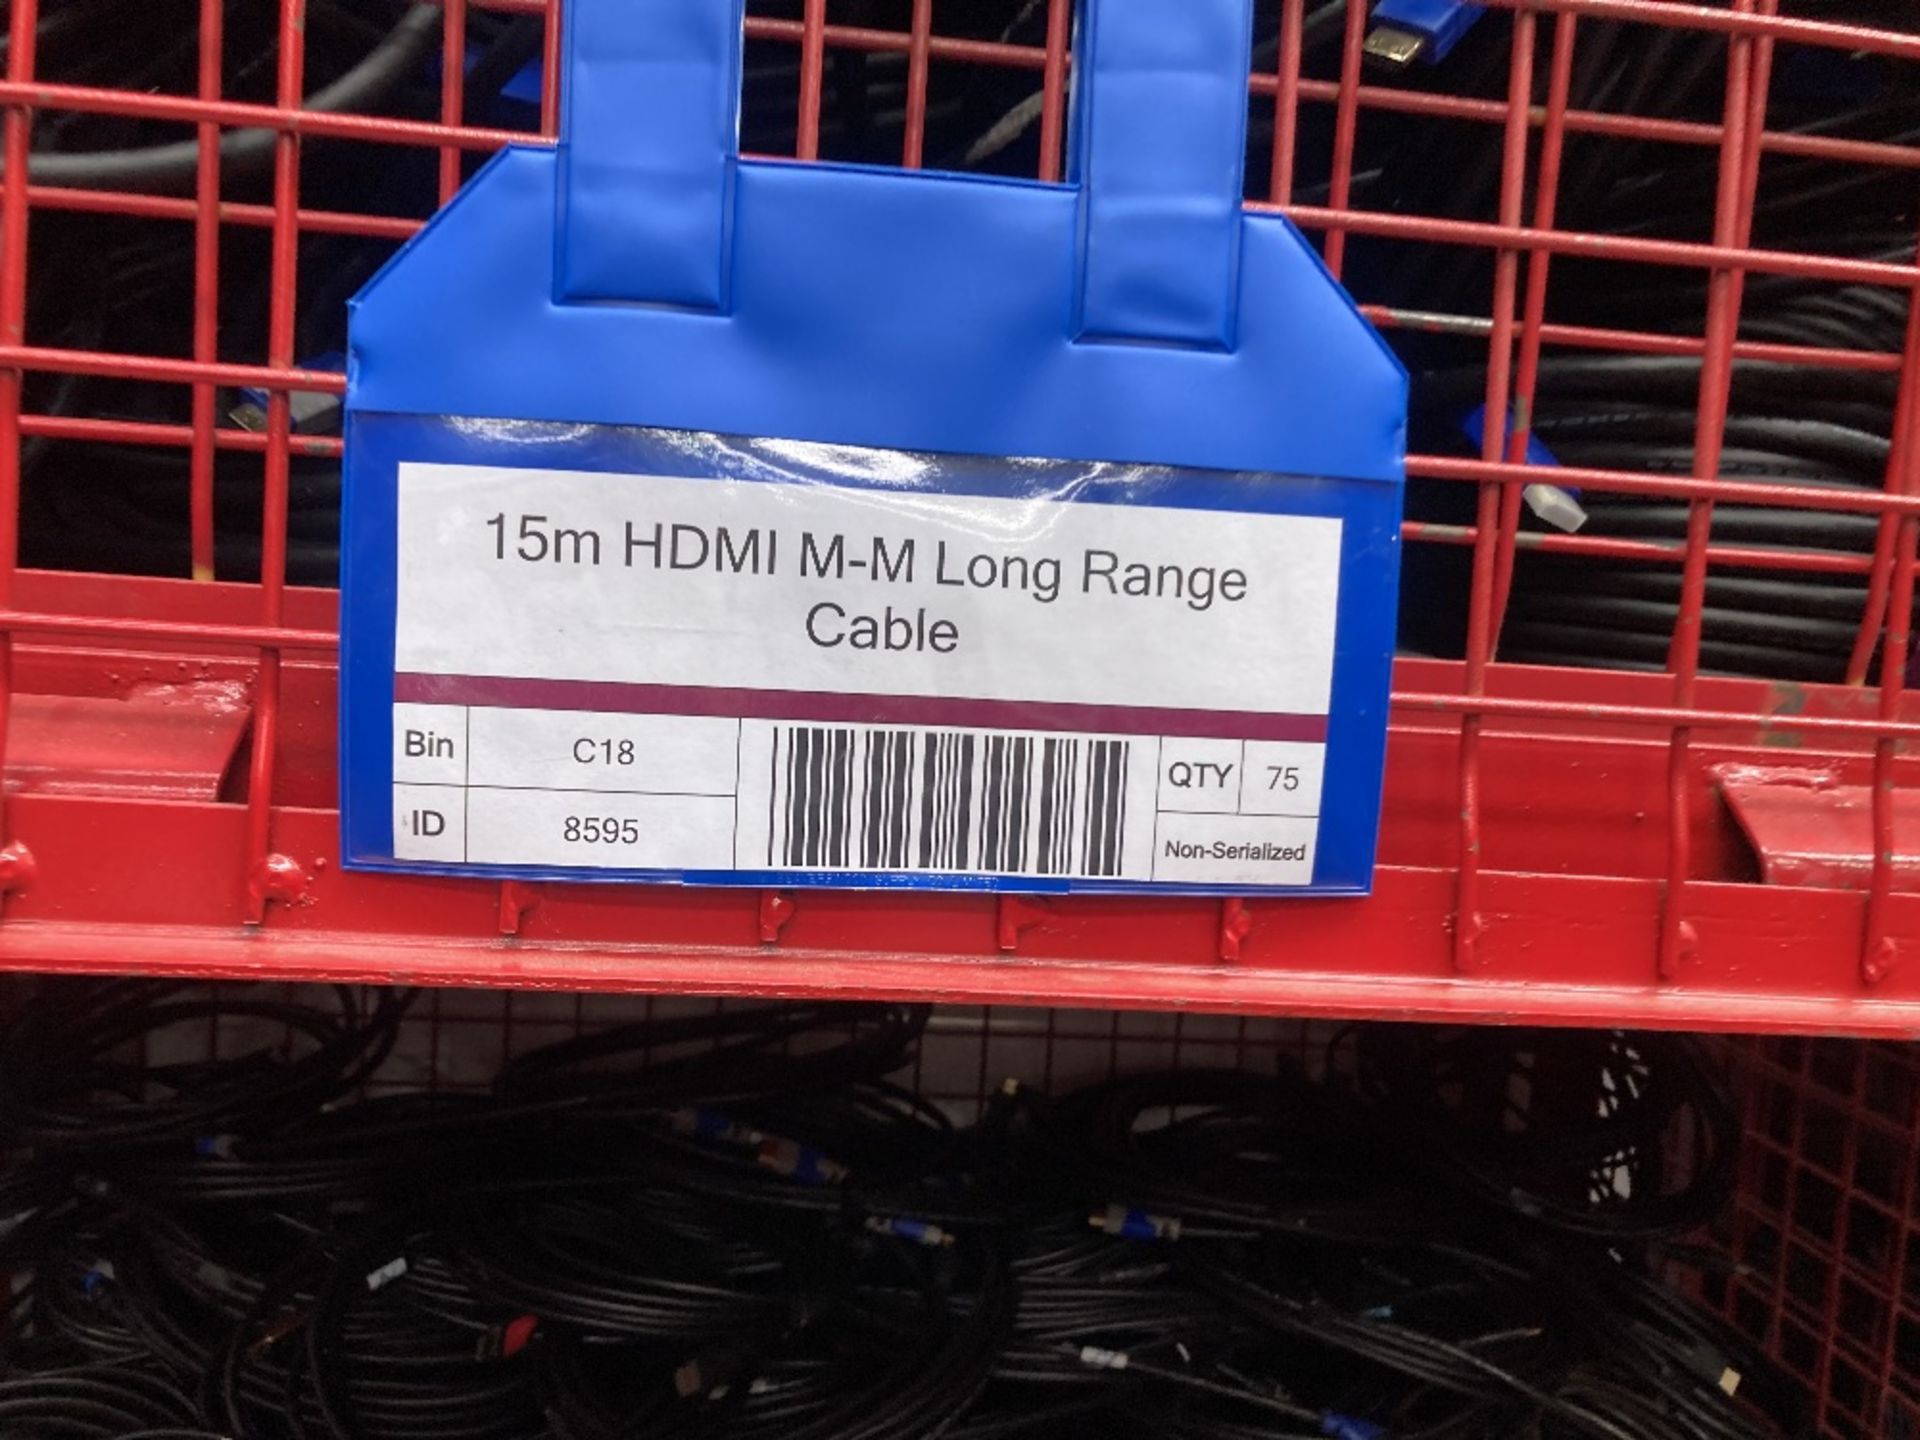 Large Quantity of 15m HDMI M-M Long Range Cable with Steel Fabricated Stillage - Image 4 of 4